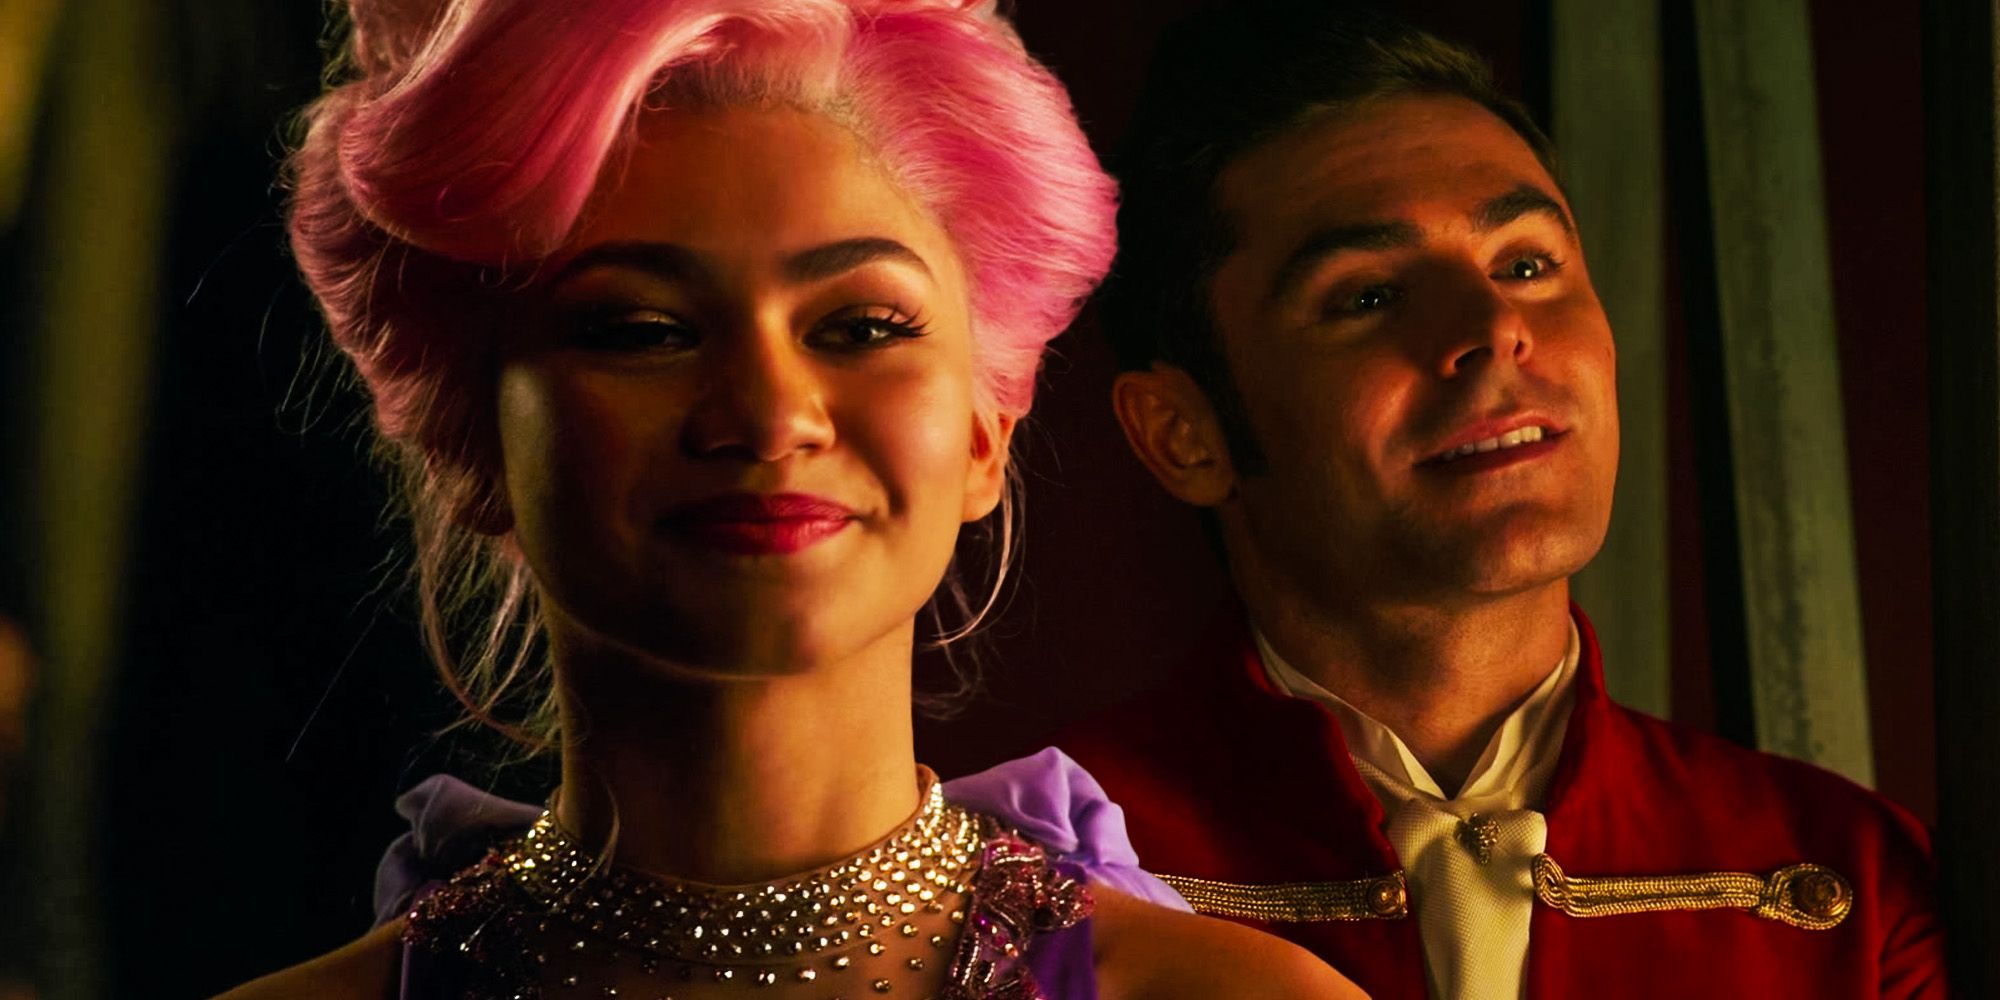 A blended image features Zendaya as Anne Wheeler and Zac Efron as Phillip Carlyle in The Greatest Showman